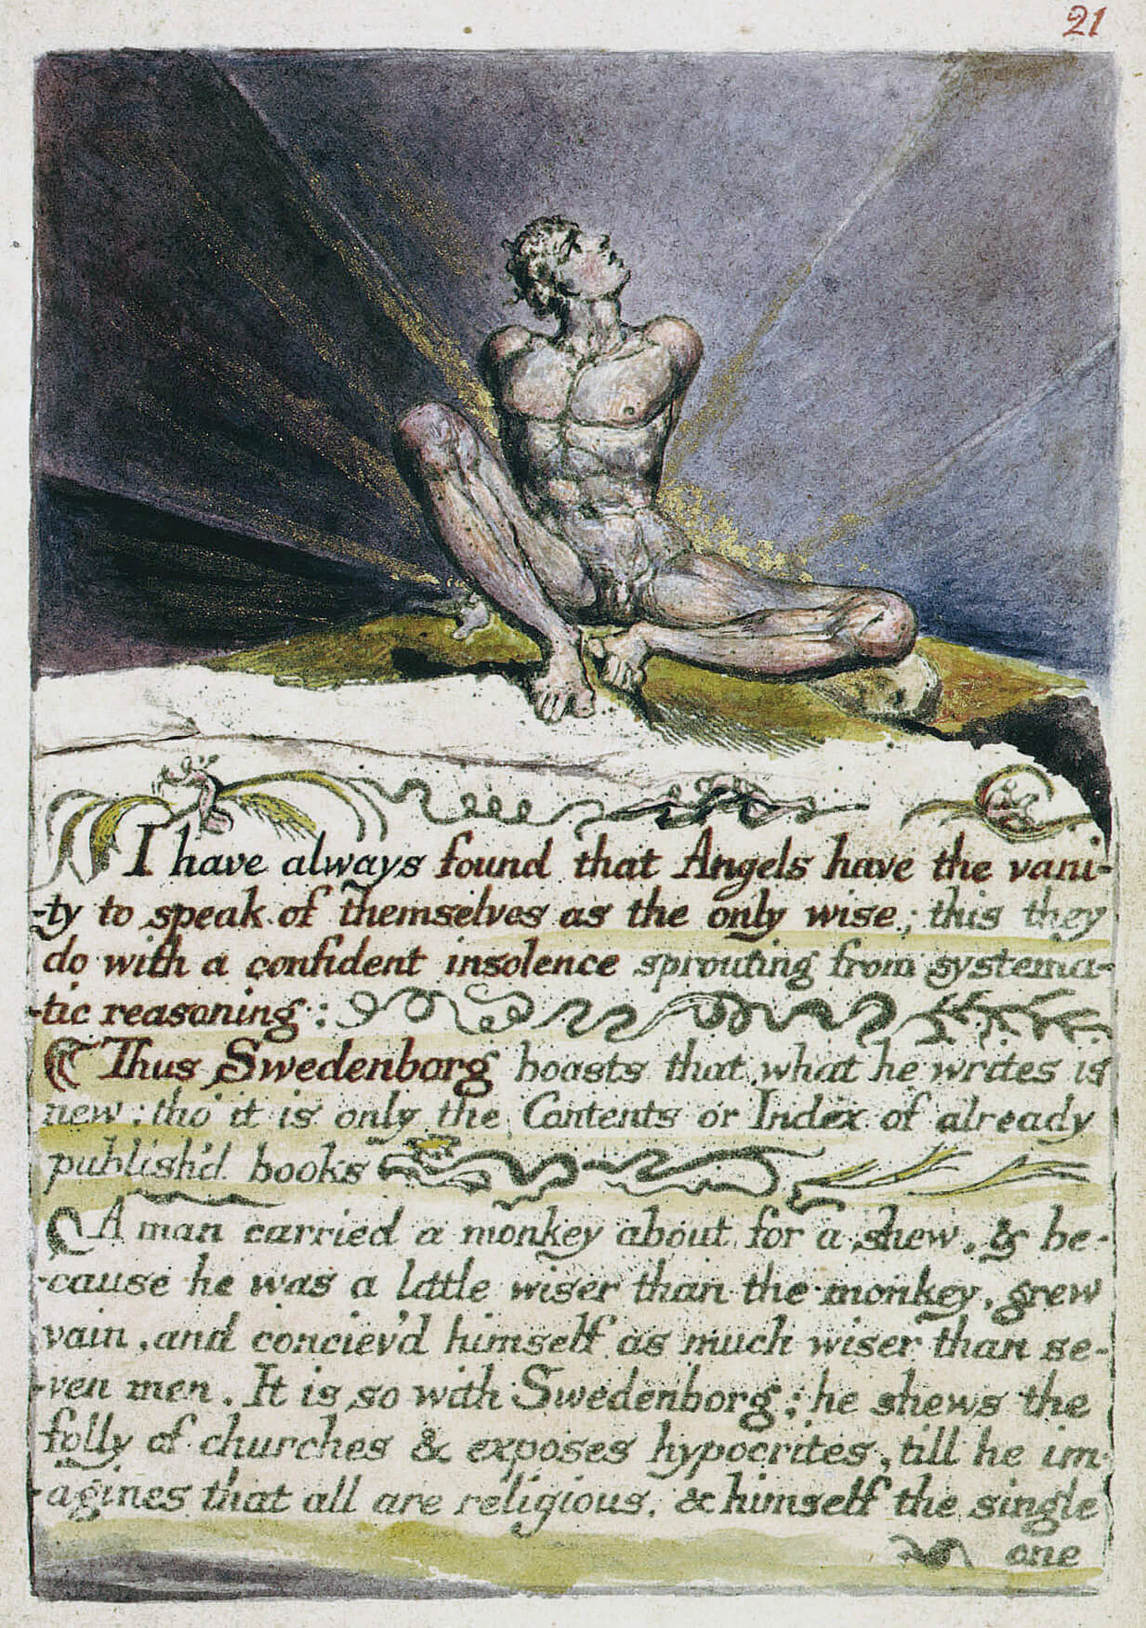 William Blake, The Marriage of Heaven and Hell (1790)